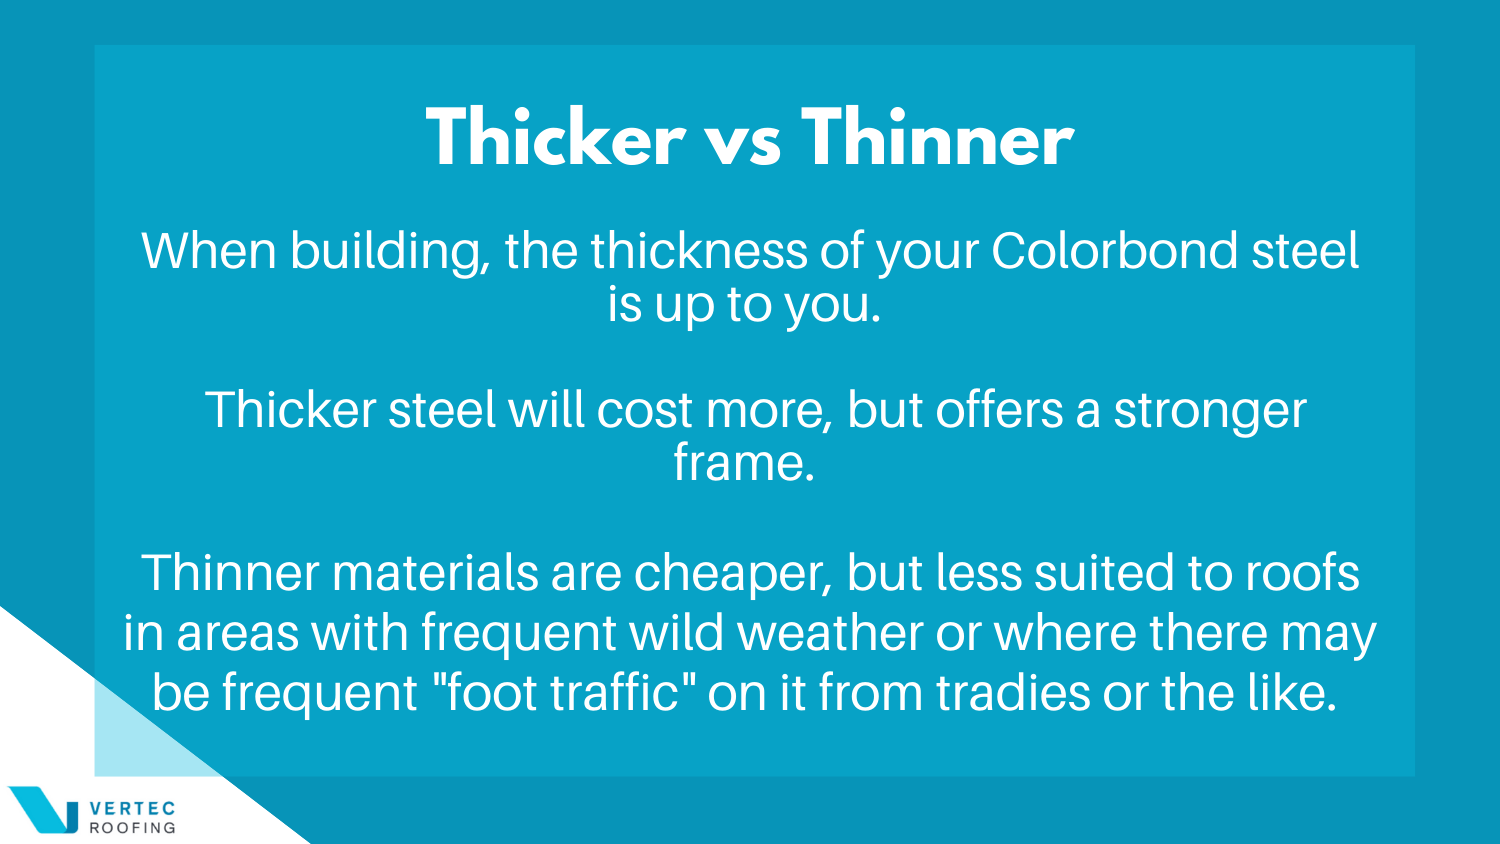 things to consider when choosing between the thinner or thicker gauge of colorbond roofing